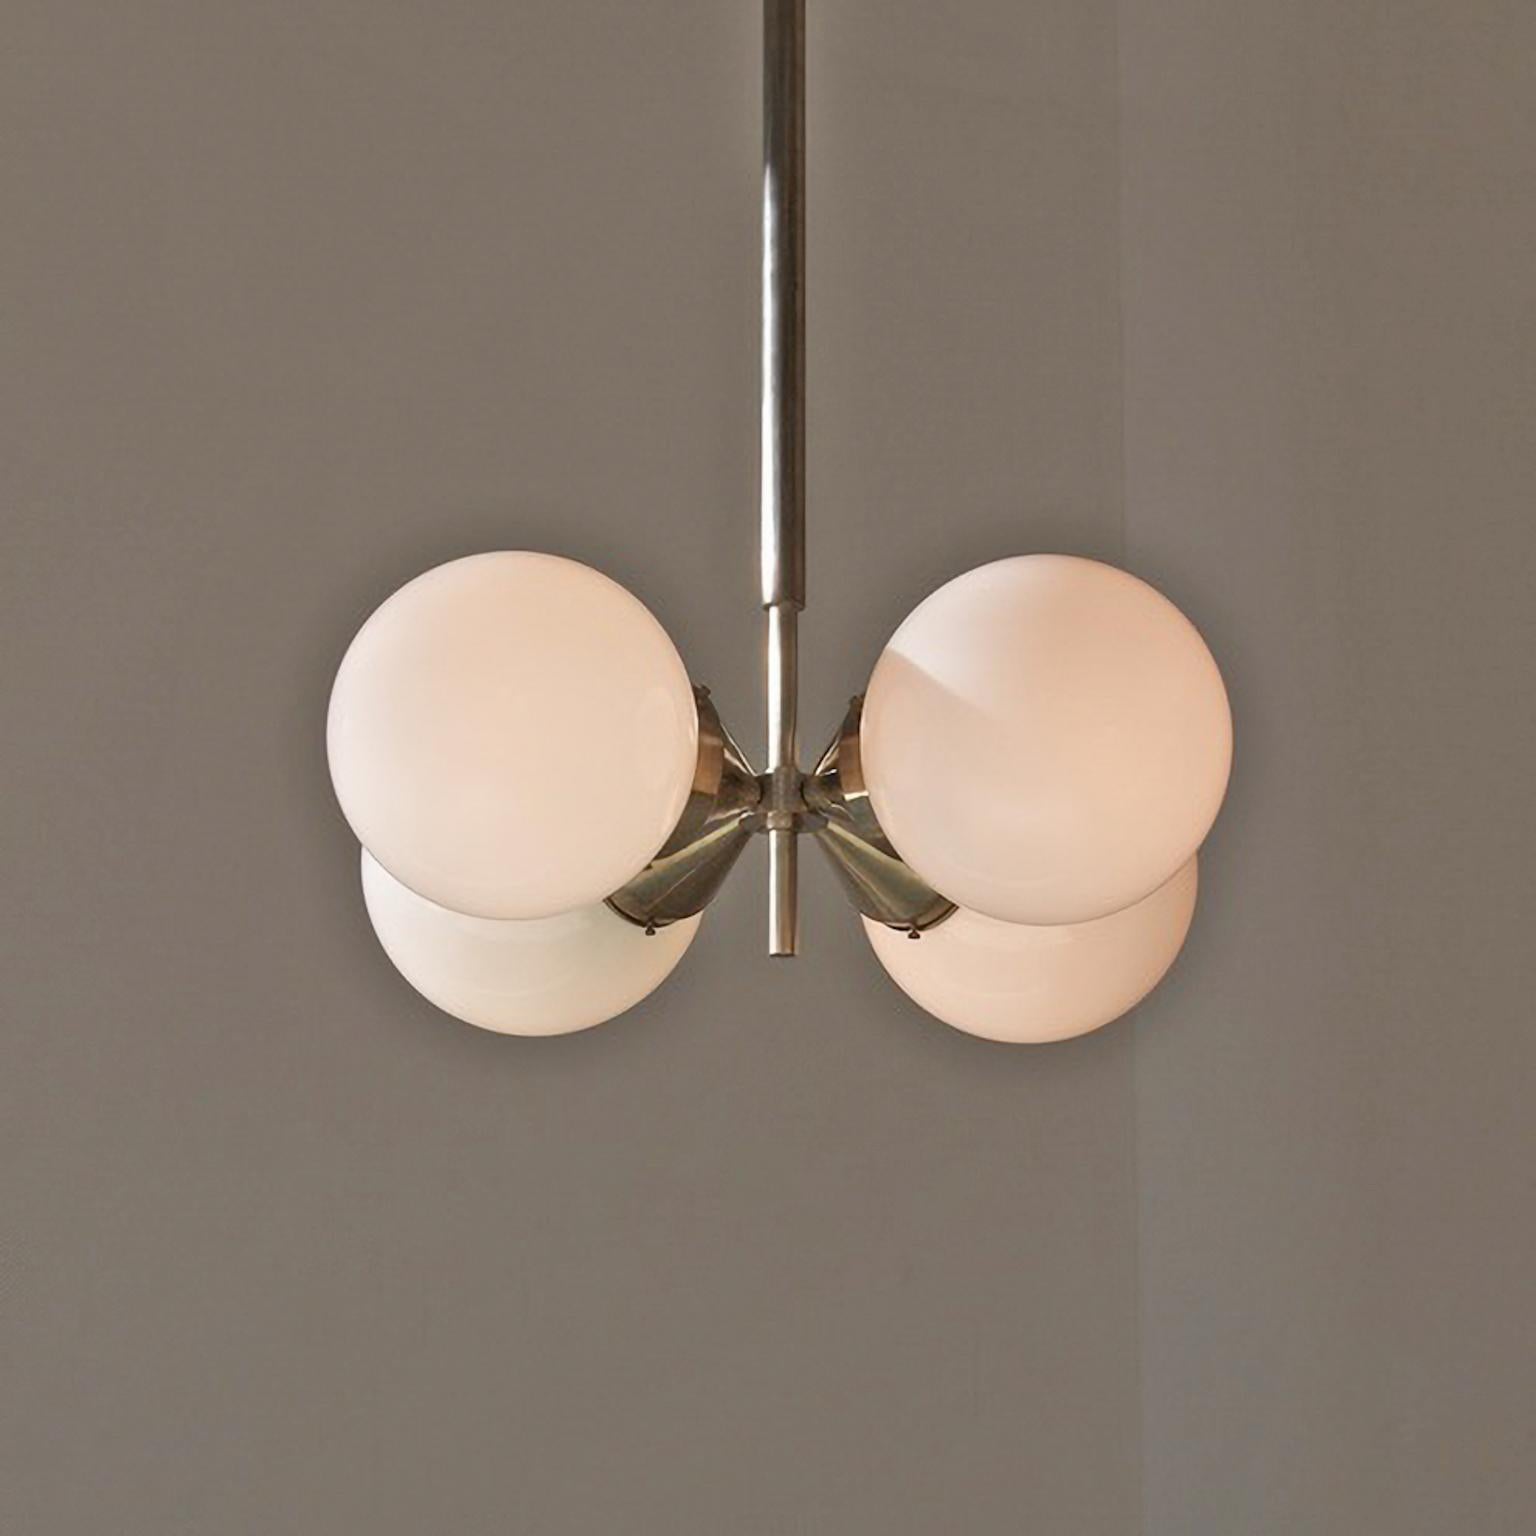 Modernist Pendant Light with 4 Opaline Glass Bulbs, Nickel Plated Brass c. 1930 For Sale 1